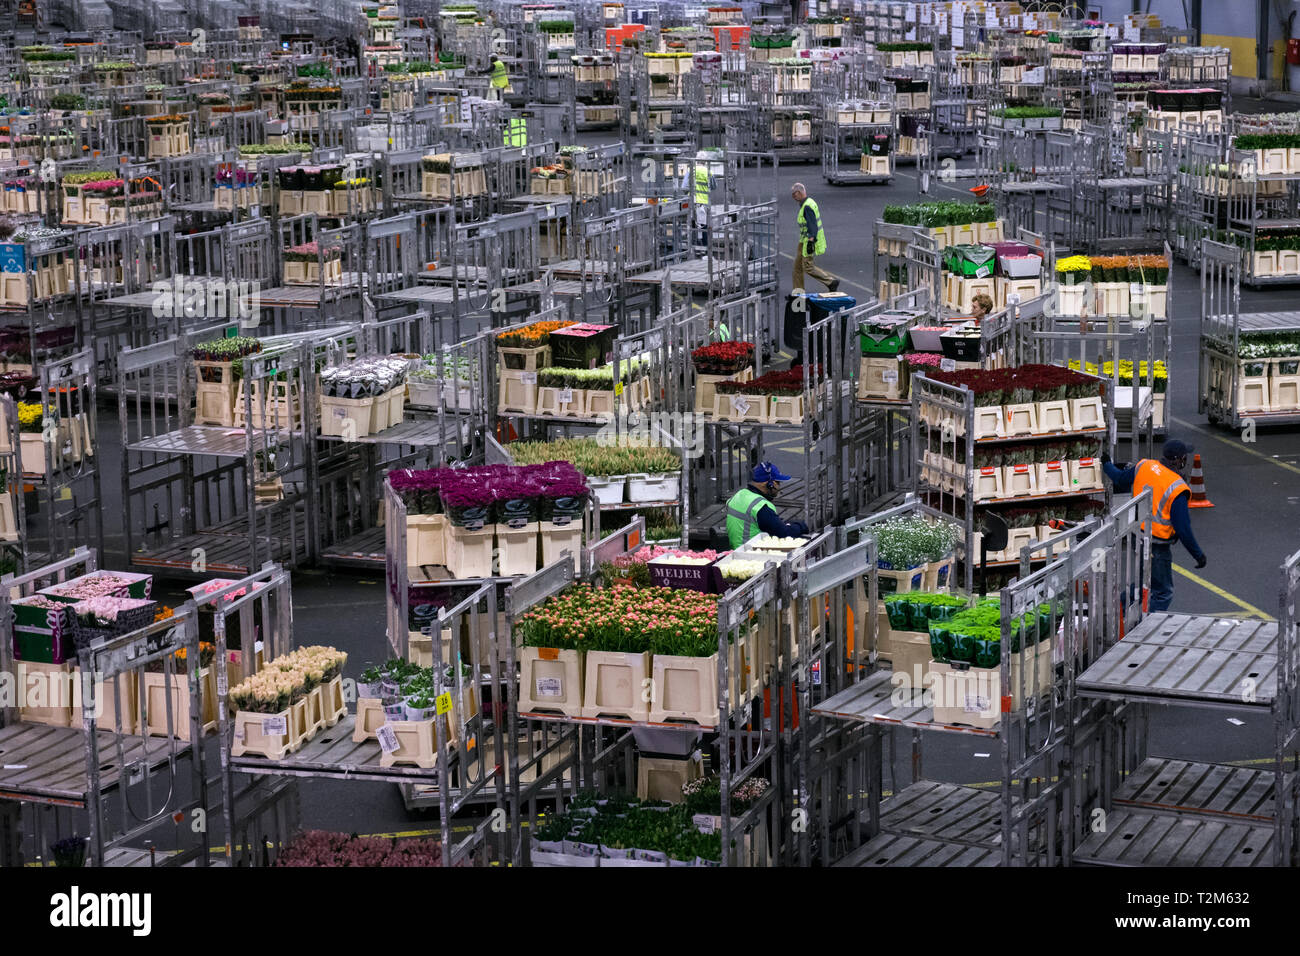 Workers of the company distribute the boxes of flowers to be sent to their buyers. This auction is one of the largest flower auctions in the world. Stock Photo